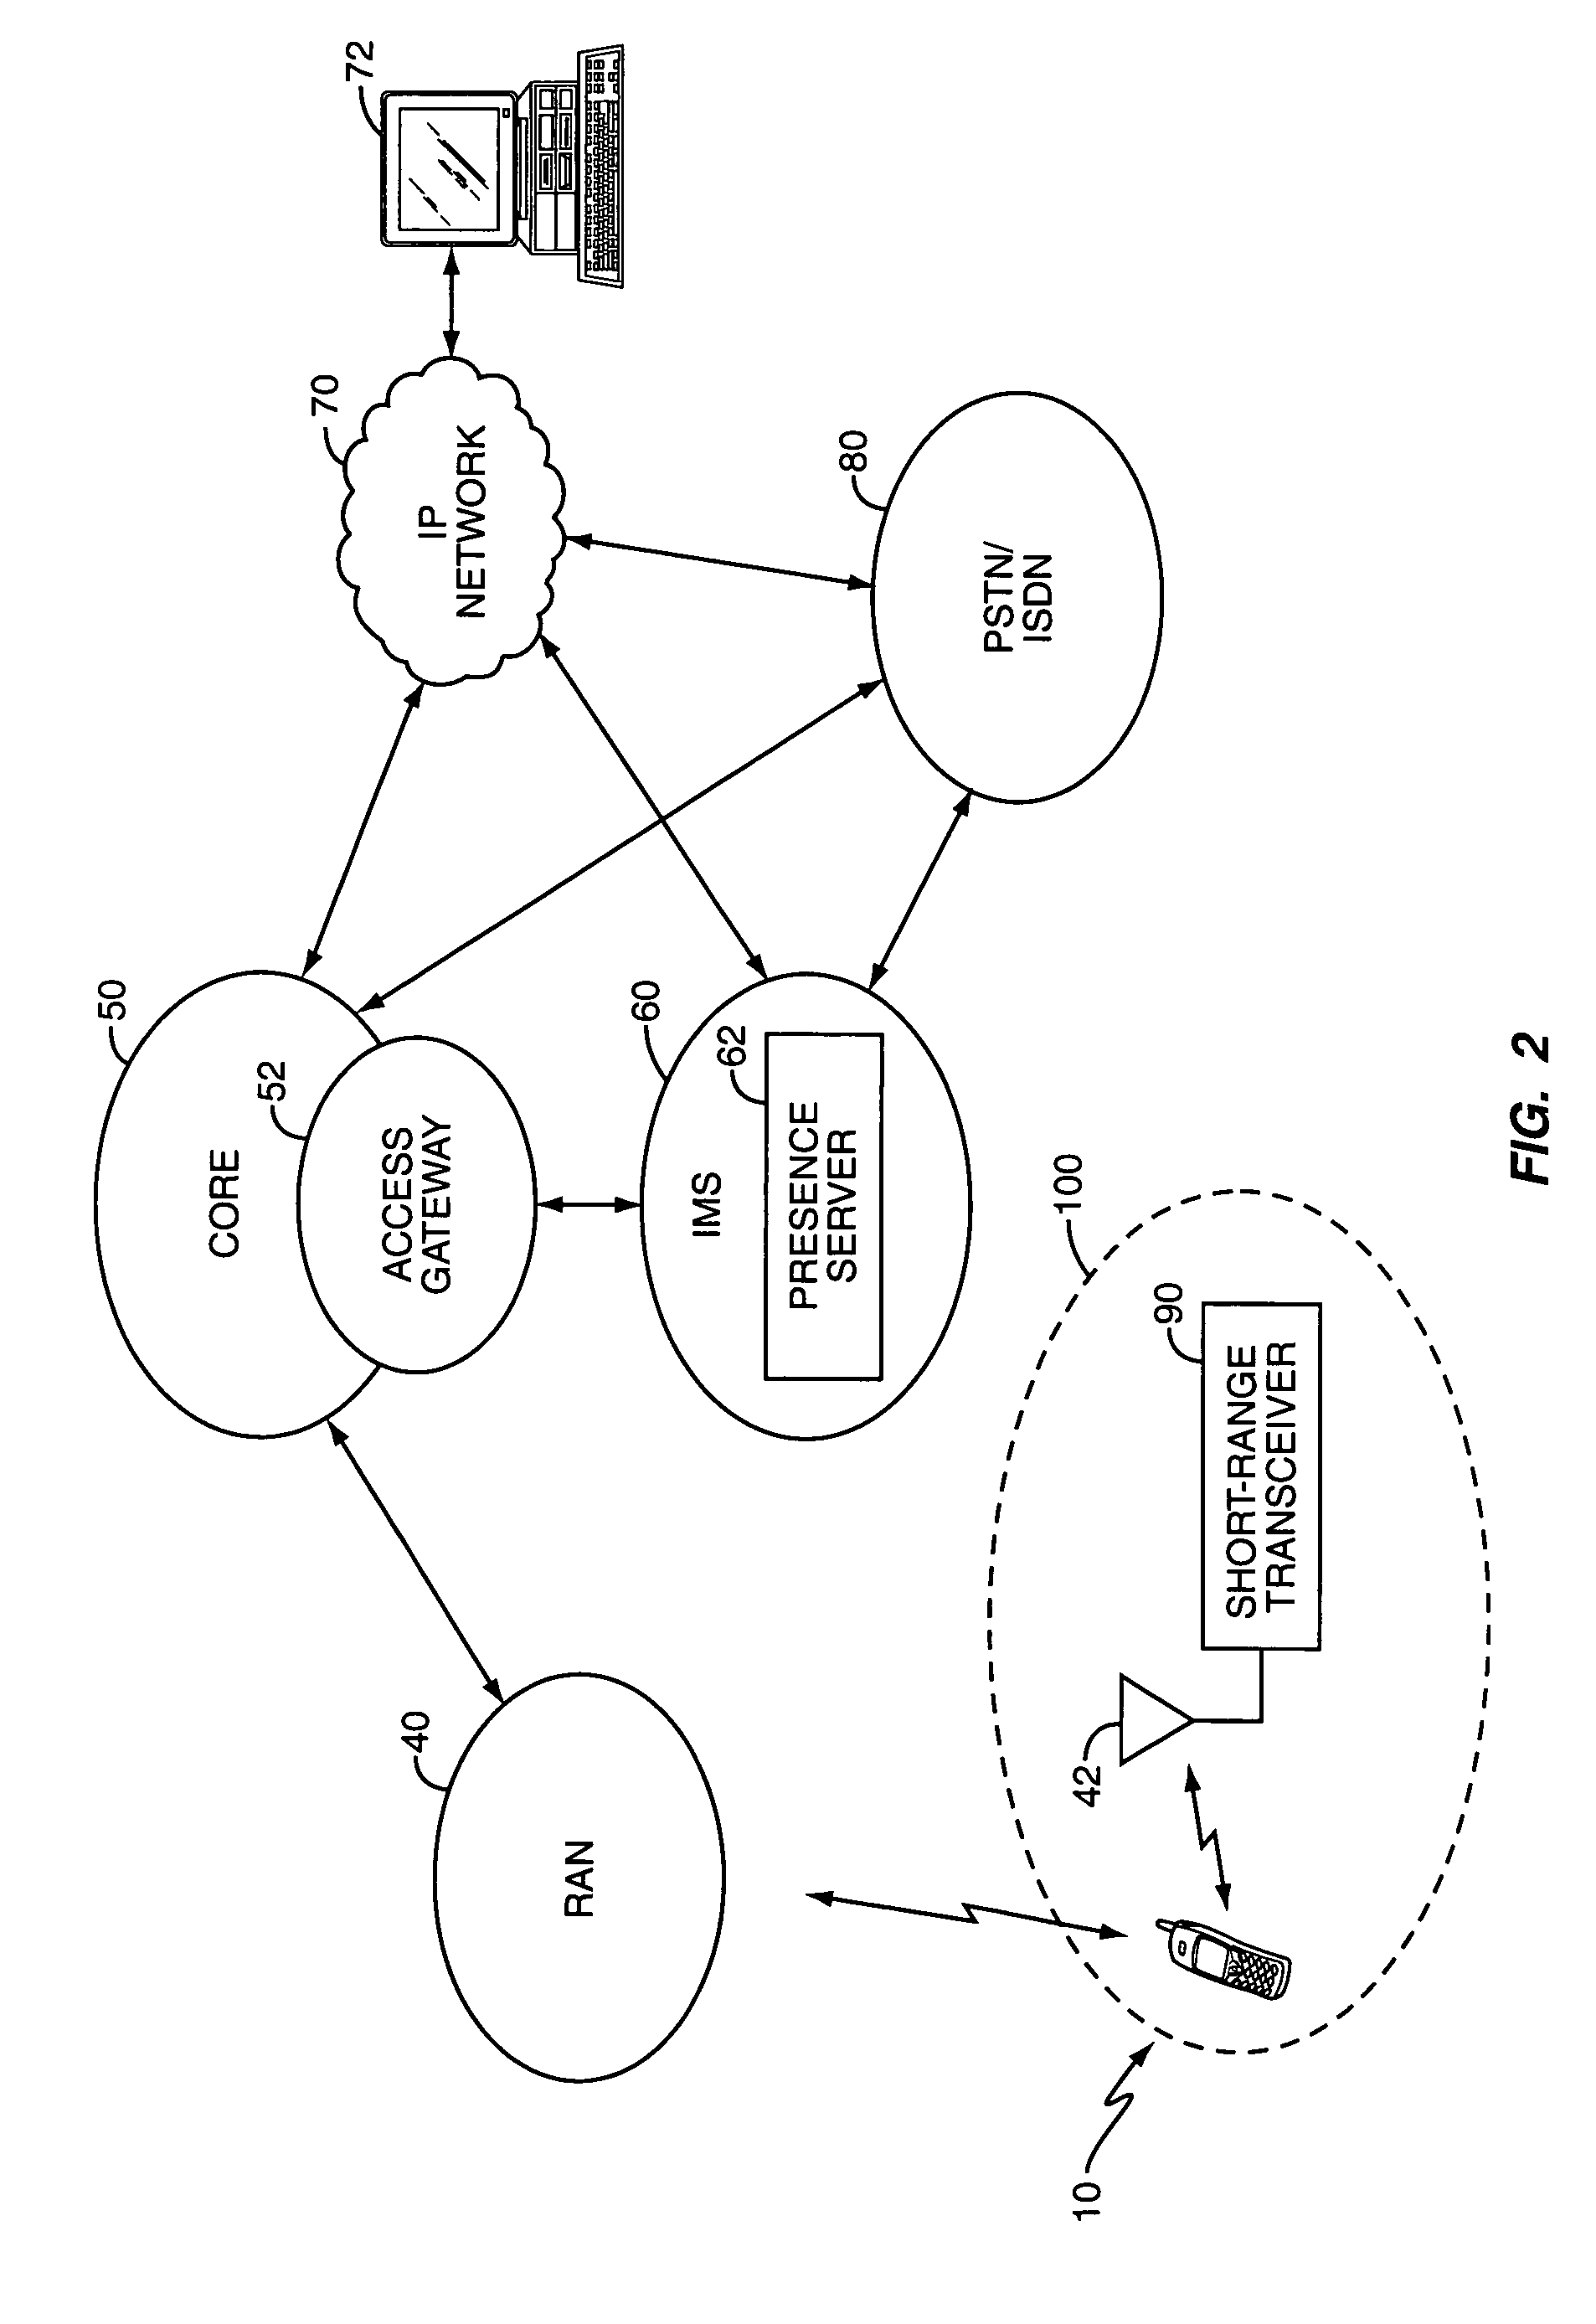 Updating presence in a wireless communications device